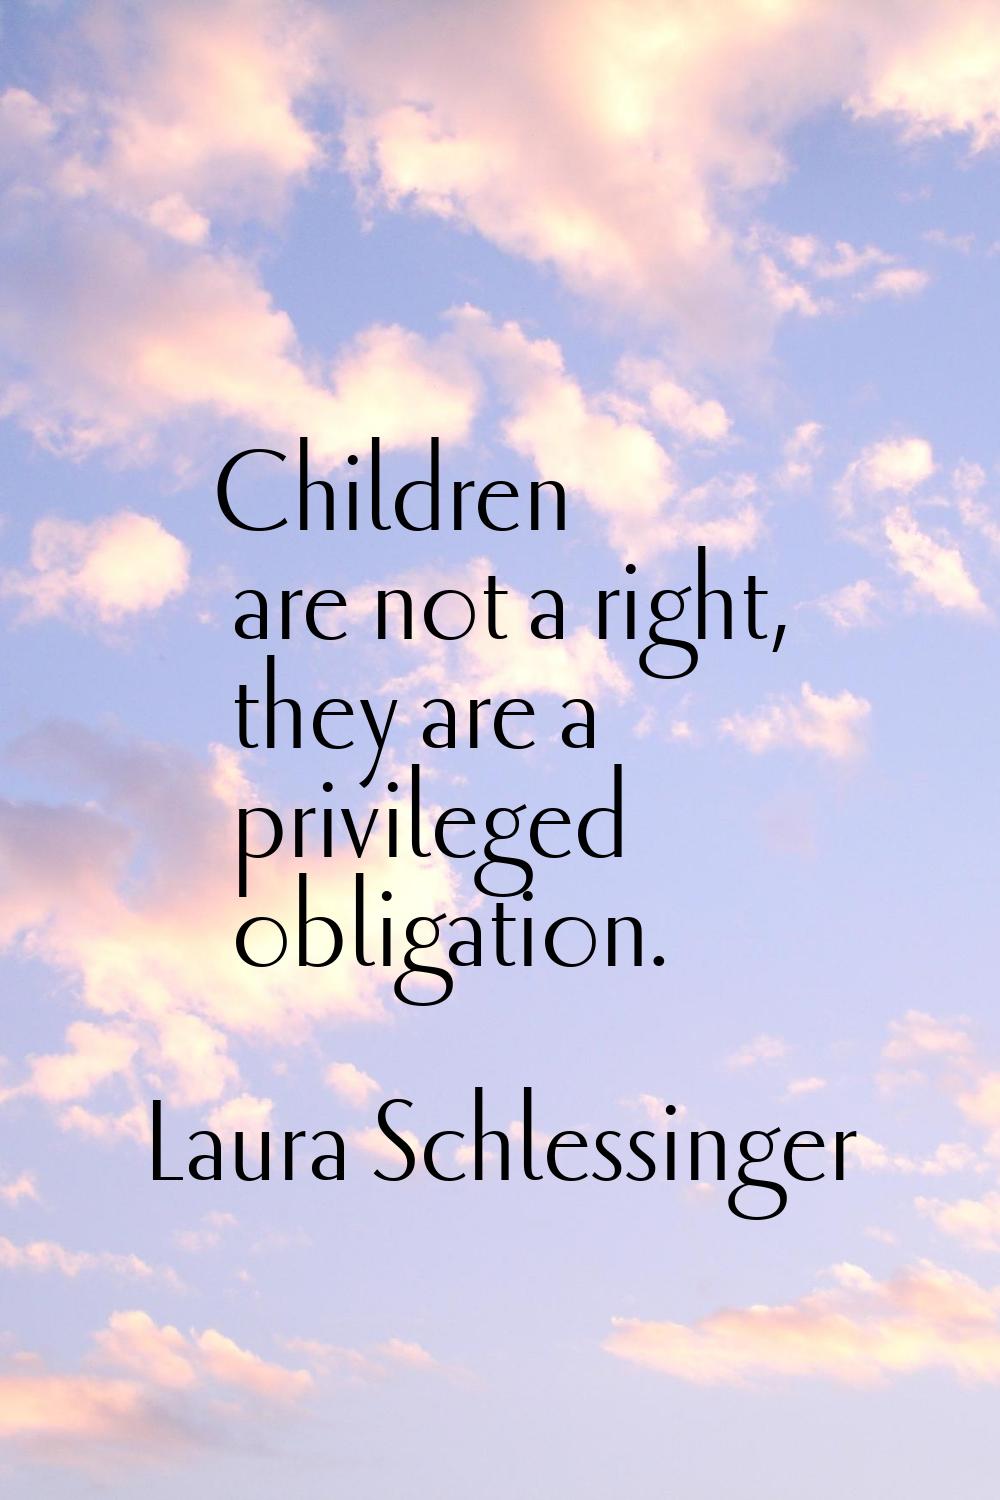 Children are not a right, they are a privileged obligation.